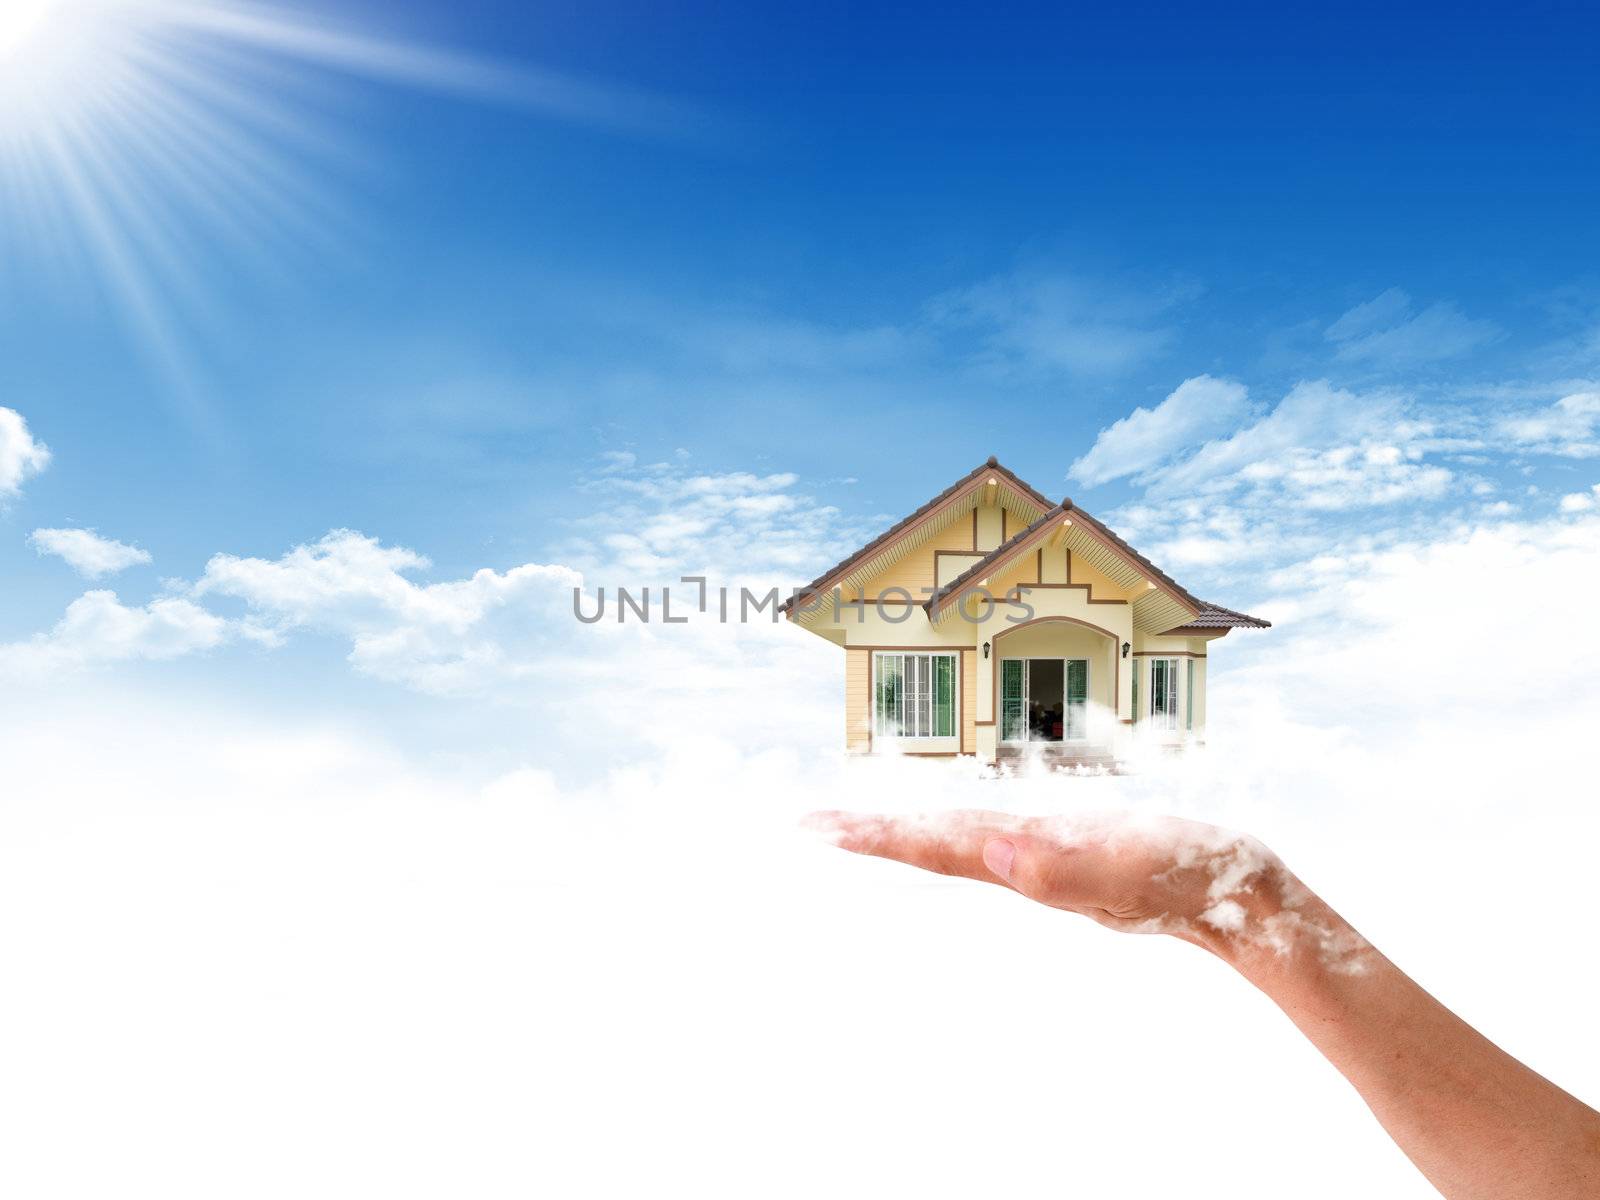 The House in the hands against the blue sky